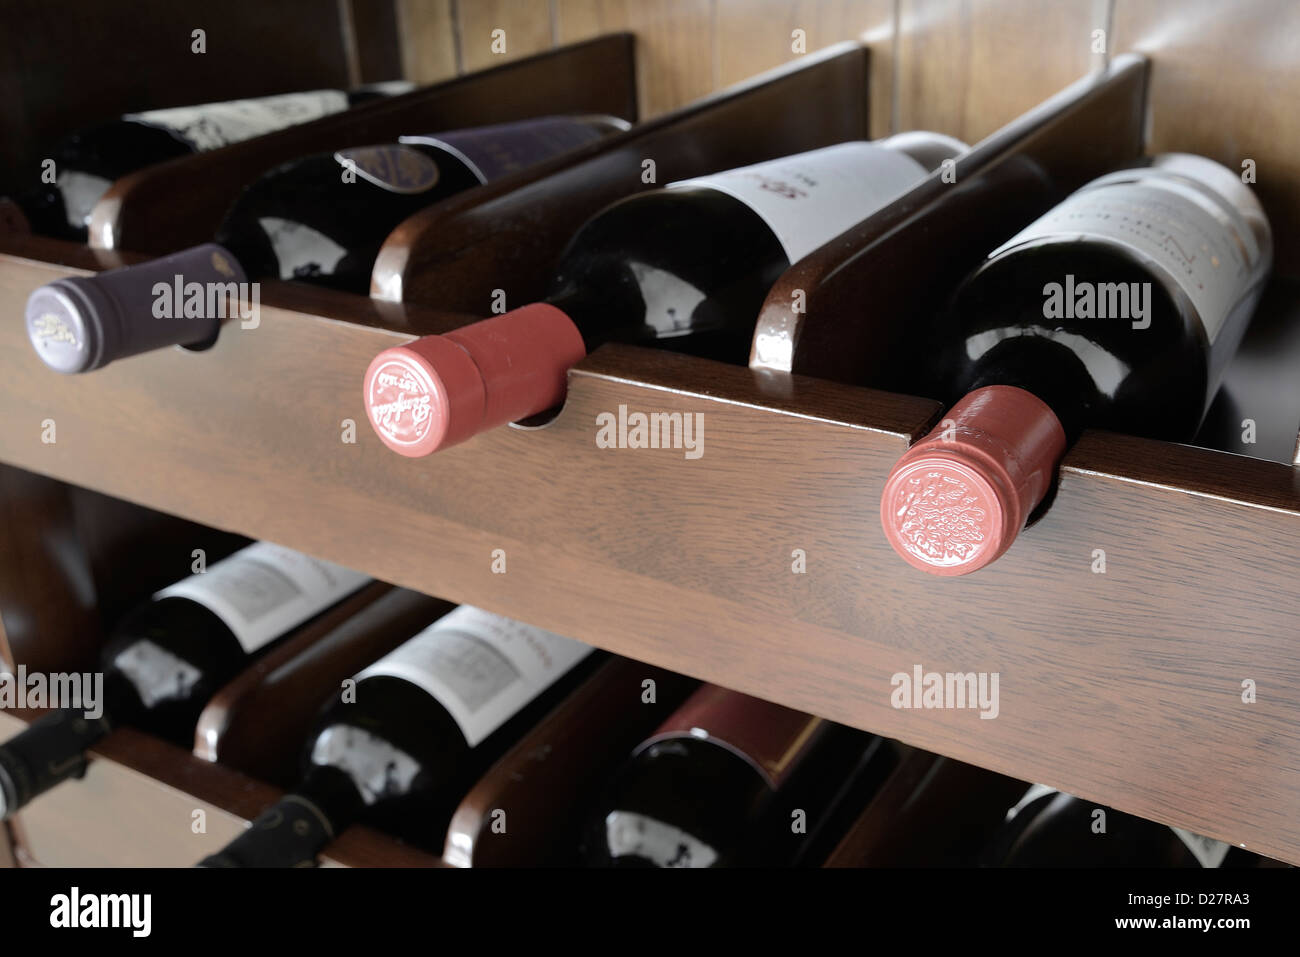 A collection of variety red wine bottles on the wooden rack. Stock Photo